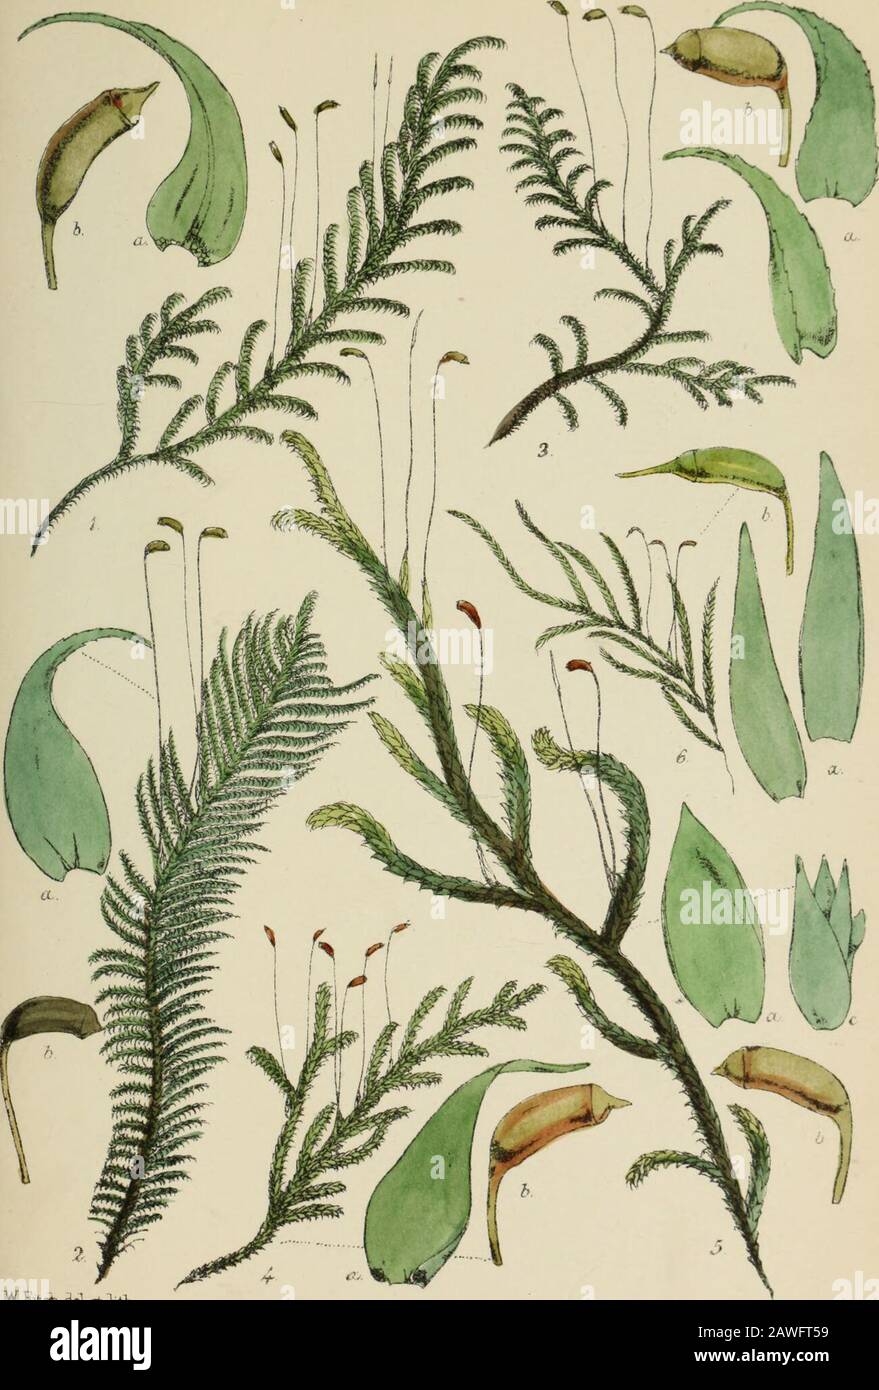 Handbook of British mosses : comprising all that are known to be natives of the British Isles . PLATE XI. 1. Hypnum uncinatum. a. leaf, magiiified. b. sporangium, magnified. 2. H. Crista-castrensis. a, leaf, magnified, b. sporangium, magnified. 3. H. molluscum (different from the usual habit). a. leaves, magnified. b, sporangium, magnified. 4. H. cupressiforme. a. leaf, magnified. b. sporangium, magnified. 5. H. scorpioides. a. leaf, magnified. b. sporangium, magnified. c. male inflorescence, magnified. 6. H. demissum. a. leaves from before and behind, magnified. b. sporangium, magnified. 1 Pl Stock Photo